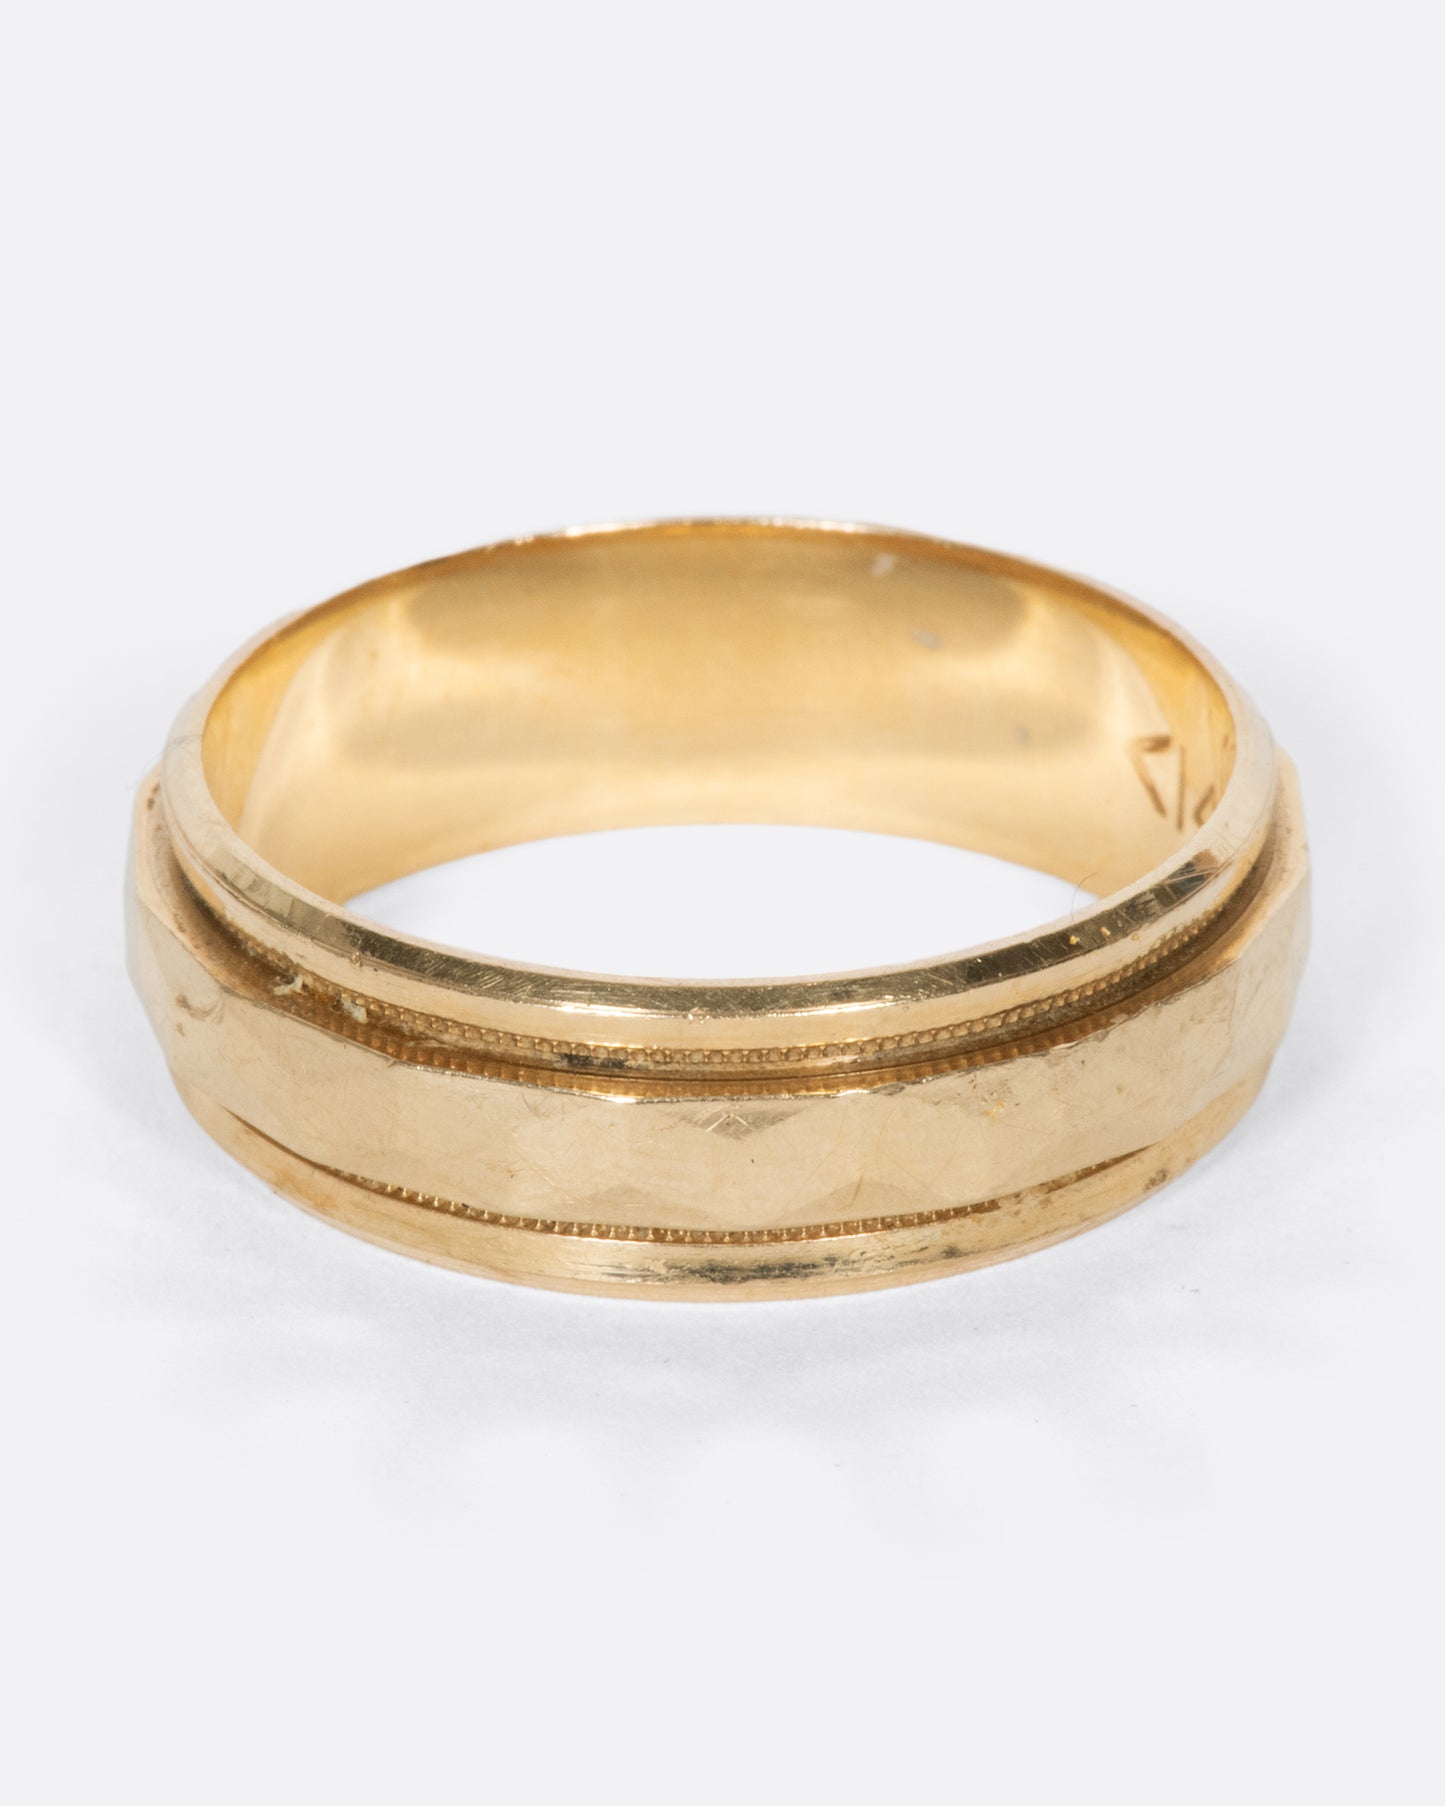 A vintage yellow gold band with geometric faceting down the center.